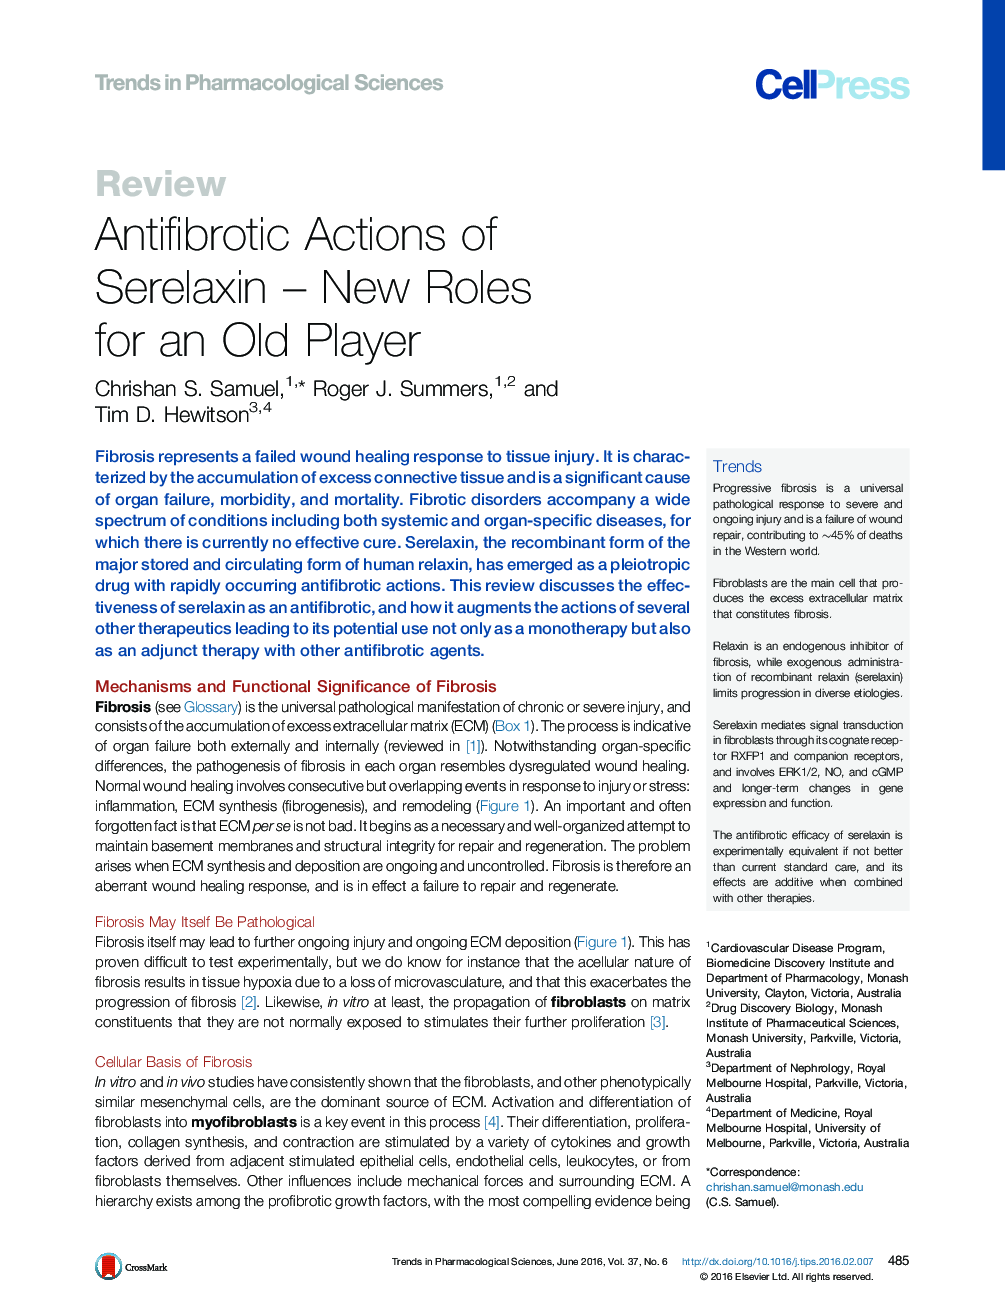 Antifibrotic Actions of Serelaxin – New Roles for an Old Player